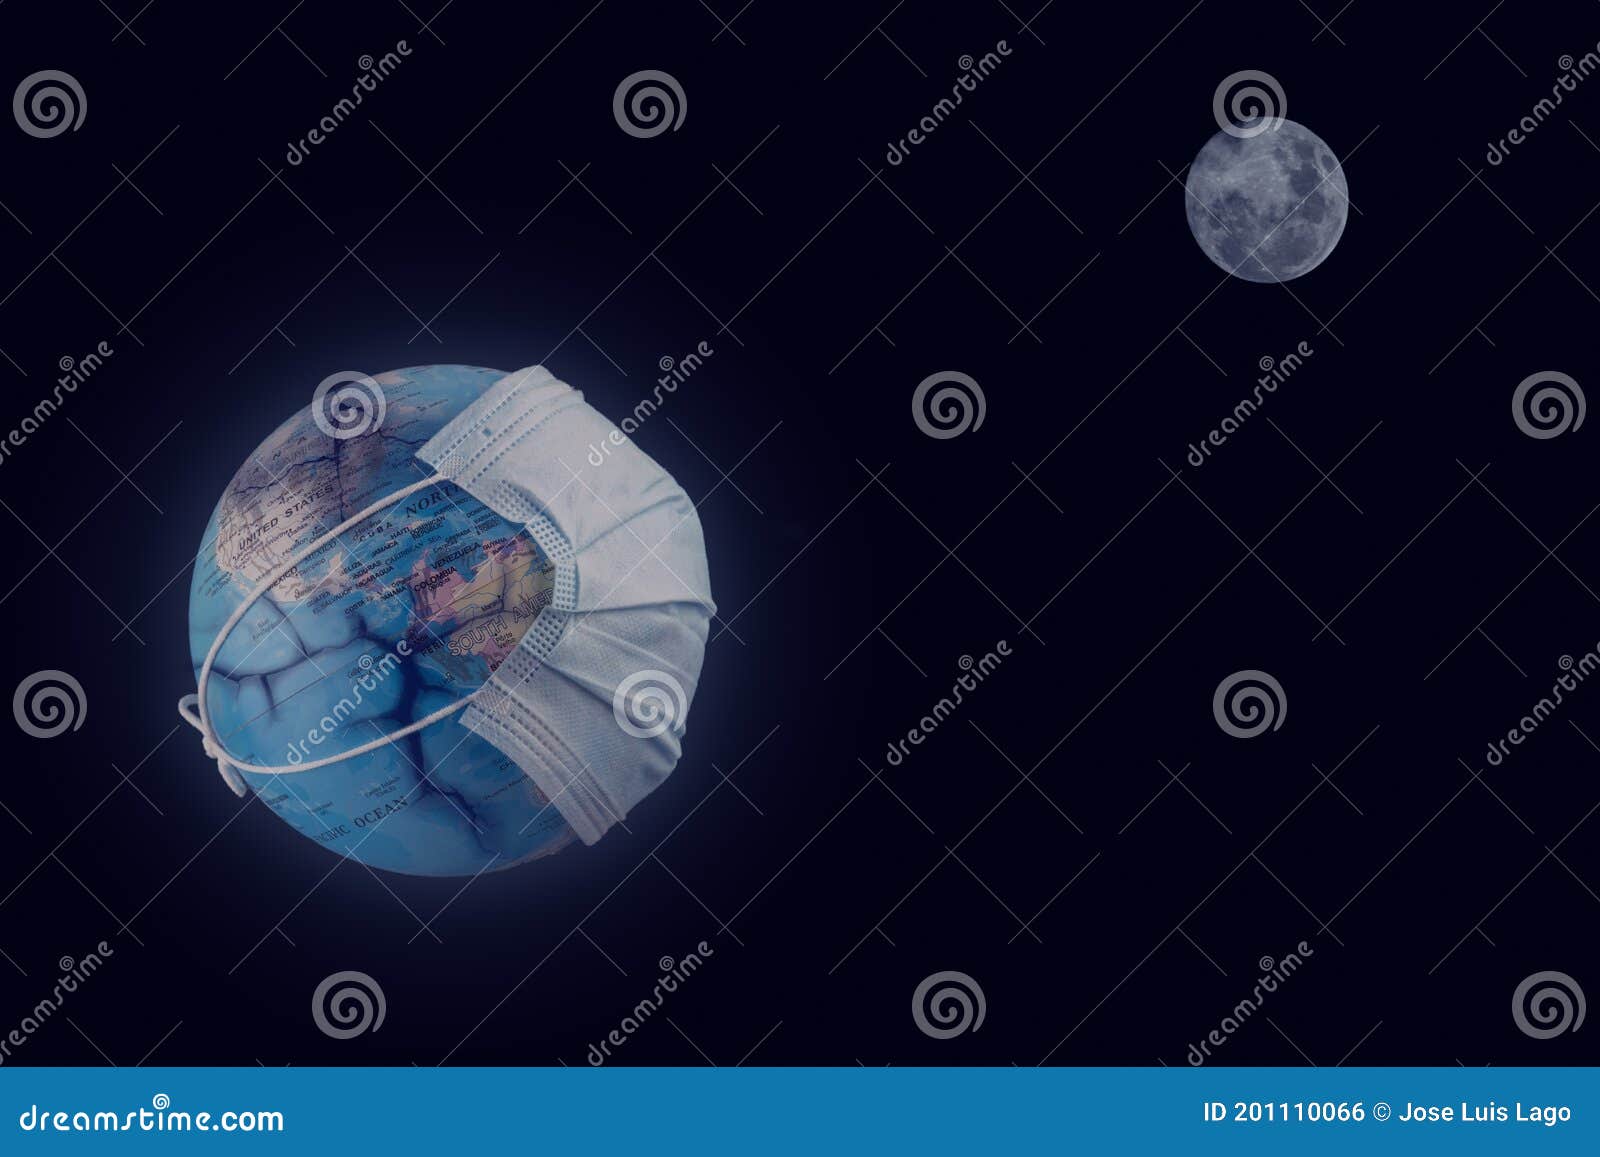 cracked earth globe with surgical mask and full moon